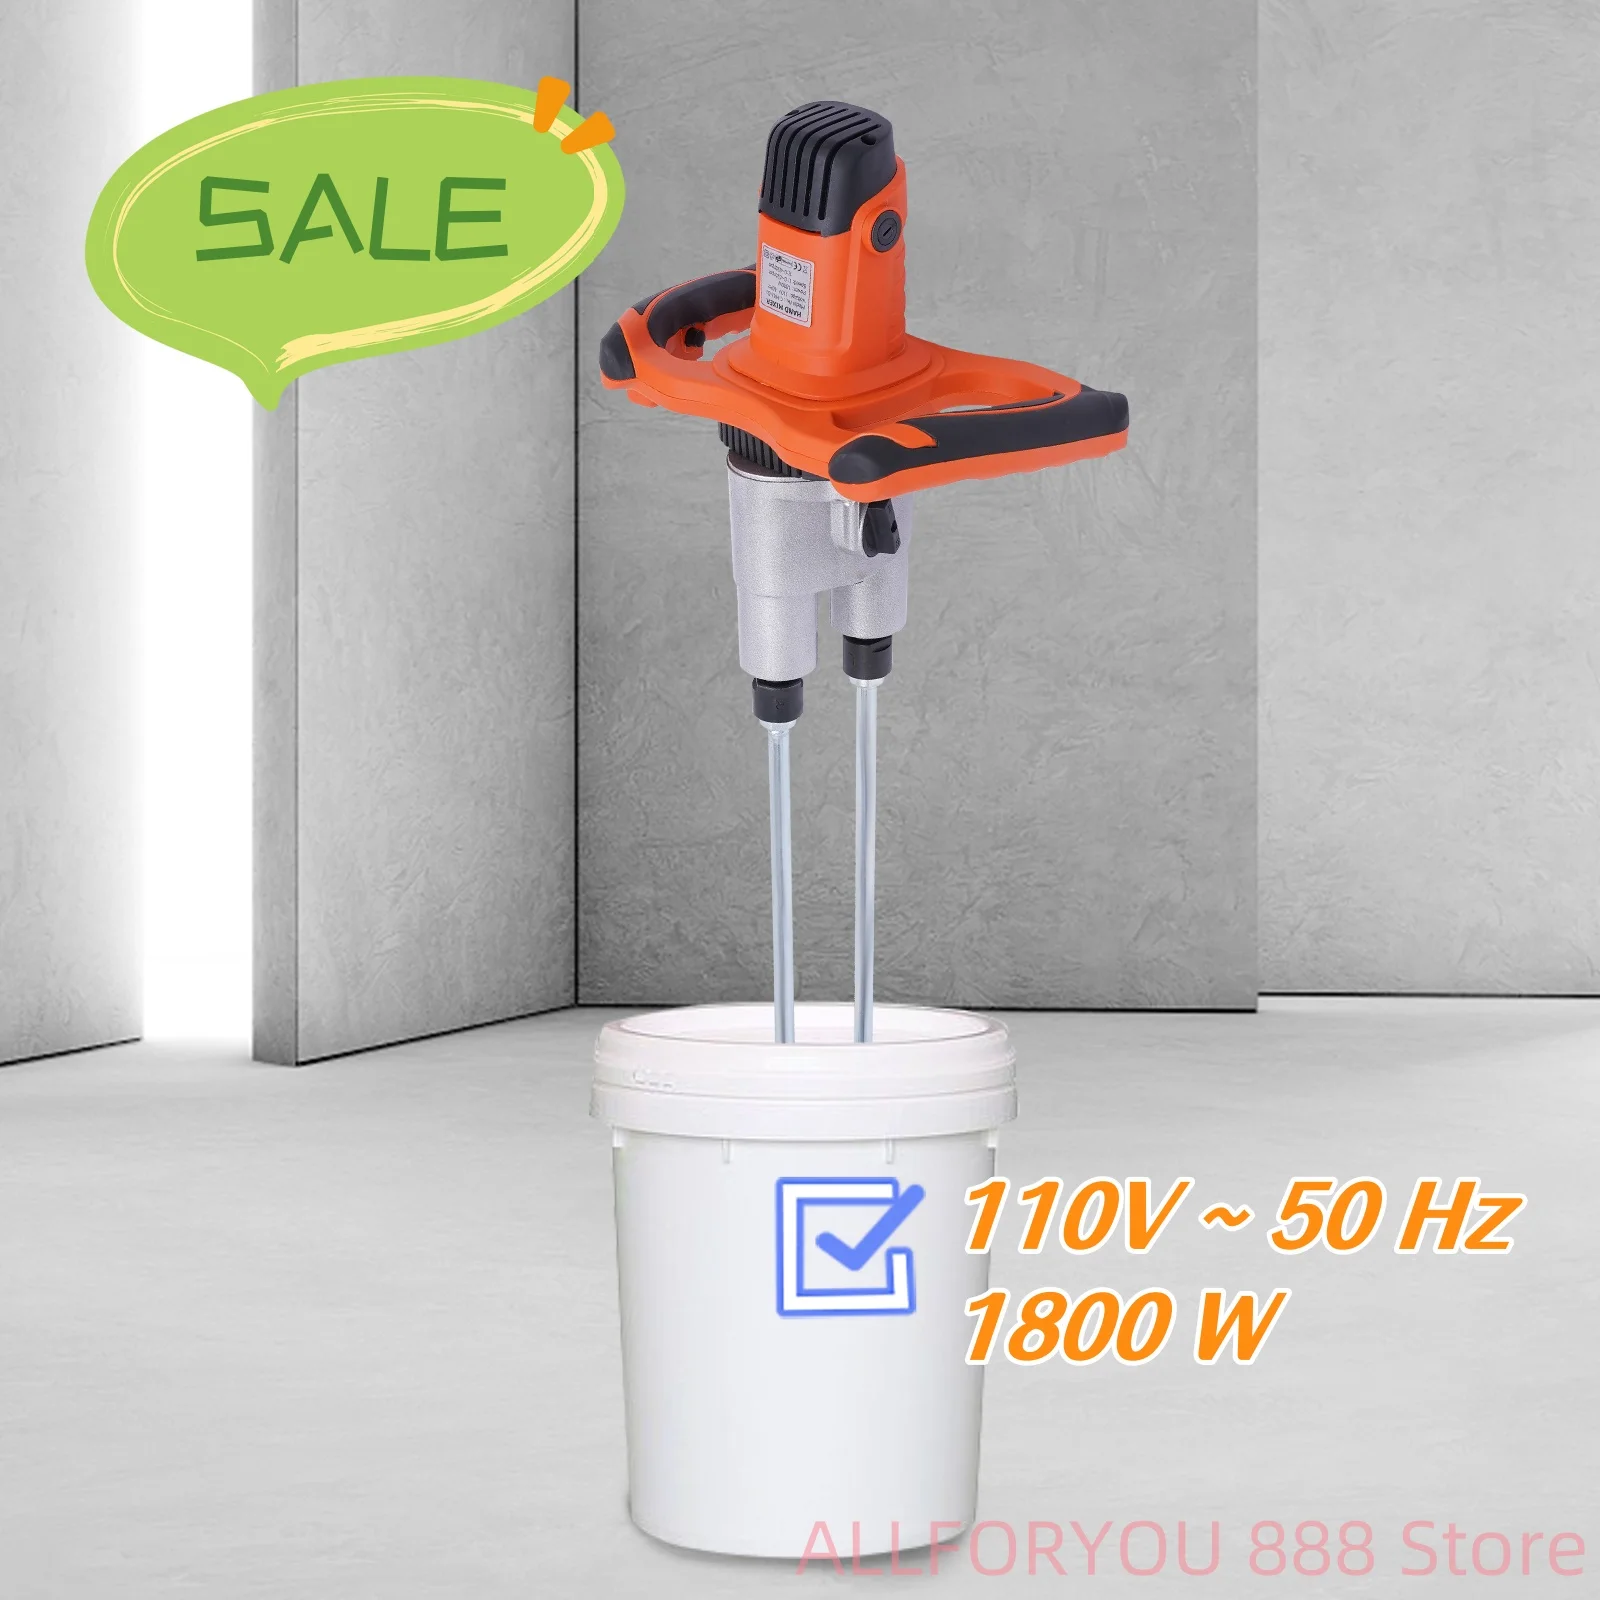 1800W Double Paddle Electric Mortar Mixer 2 Speed with Robust Aluminum Die-cast Housing Powerful and Handy stainless steel heavy duty door catch robust door stopper with impact spring and powerful locking mechanism